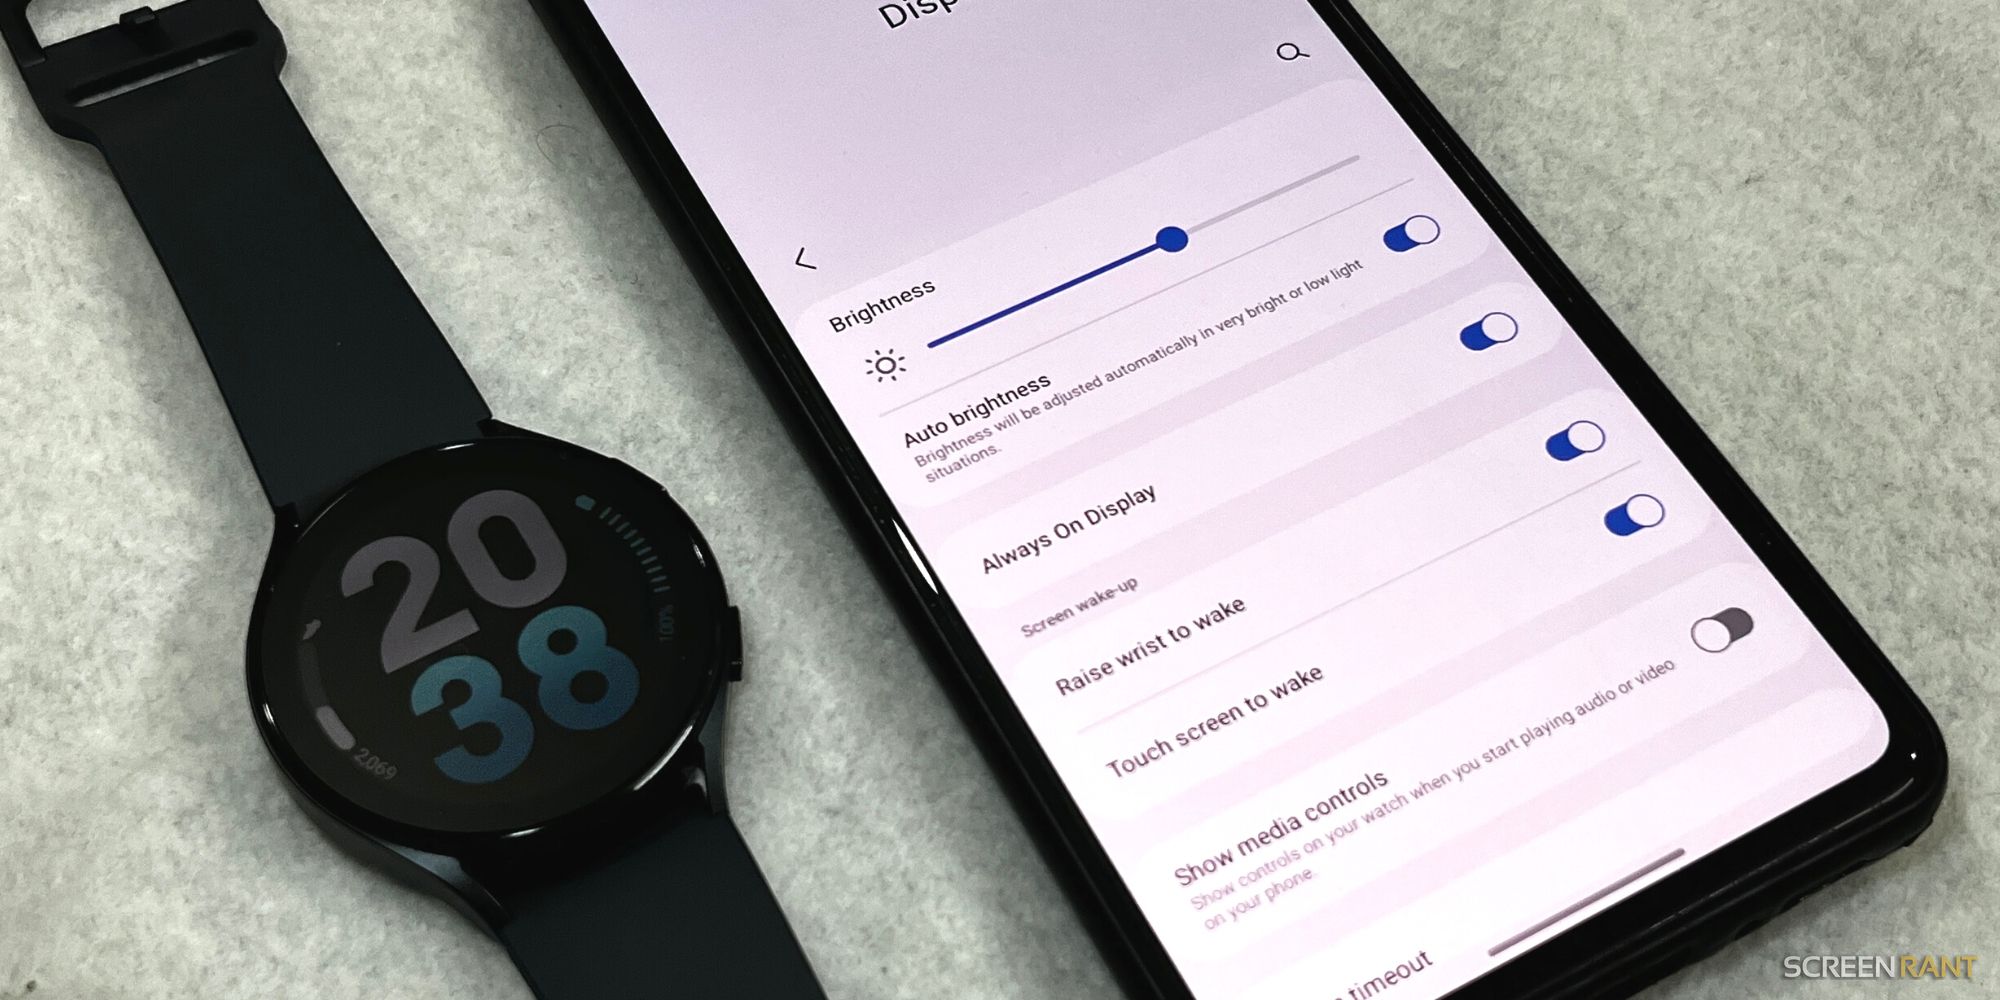 Image of the Galaxy Watch 5 and the Galaxy Wearable app showing the always-on display option